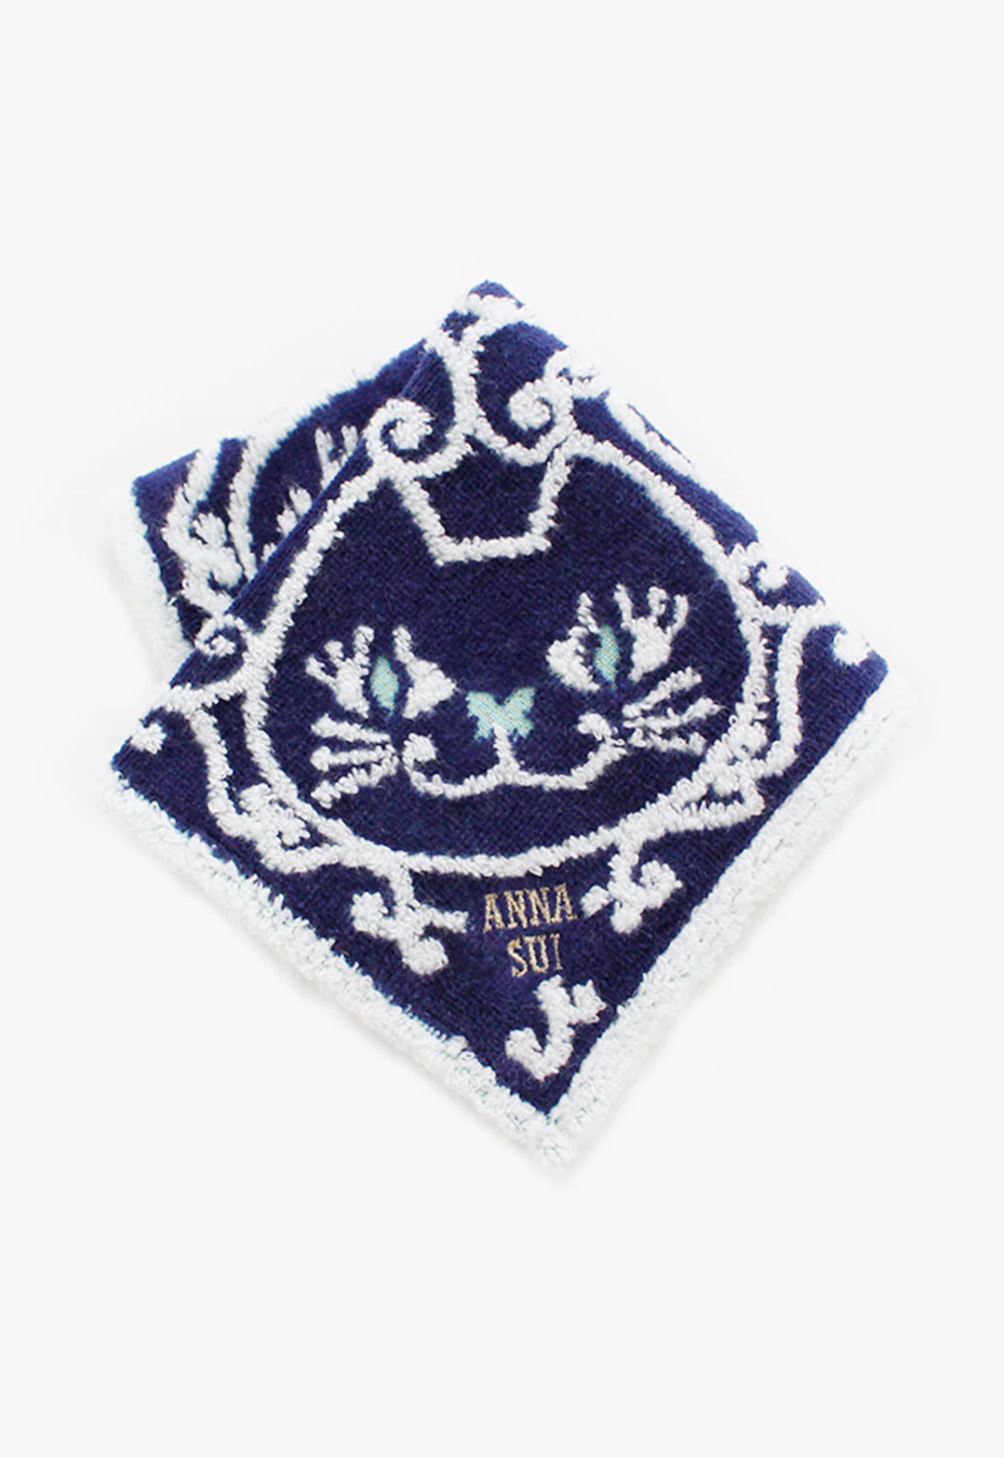 Cat Pattern Washcloth navy, detail of white and purple cat pattern, Anna Sui's label in the corner 